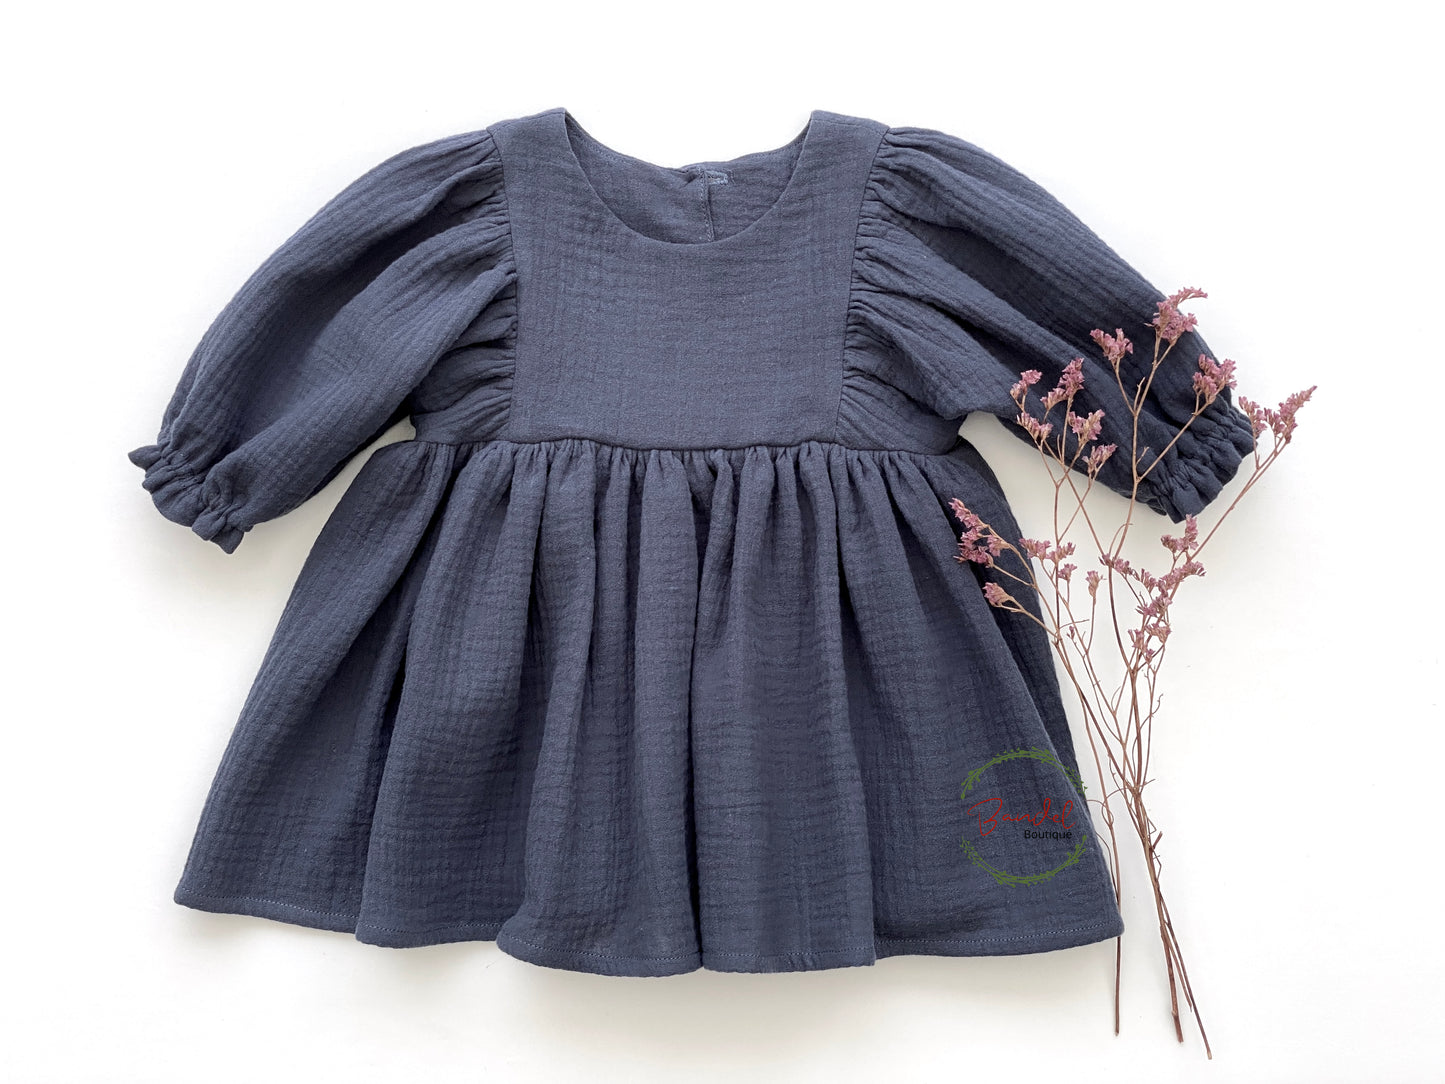 This beautiful Denim Blue 3/4 Sleeves Muslin Dress is perfect for your little girl. Crafted from organic muslin, the dress features elasticated sleeves with a frilly hem and wooden button closure on the back bodice. With a knee-length design, you can be sure to find the perfect look for any occasion.